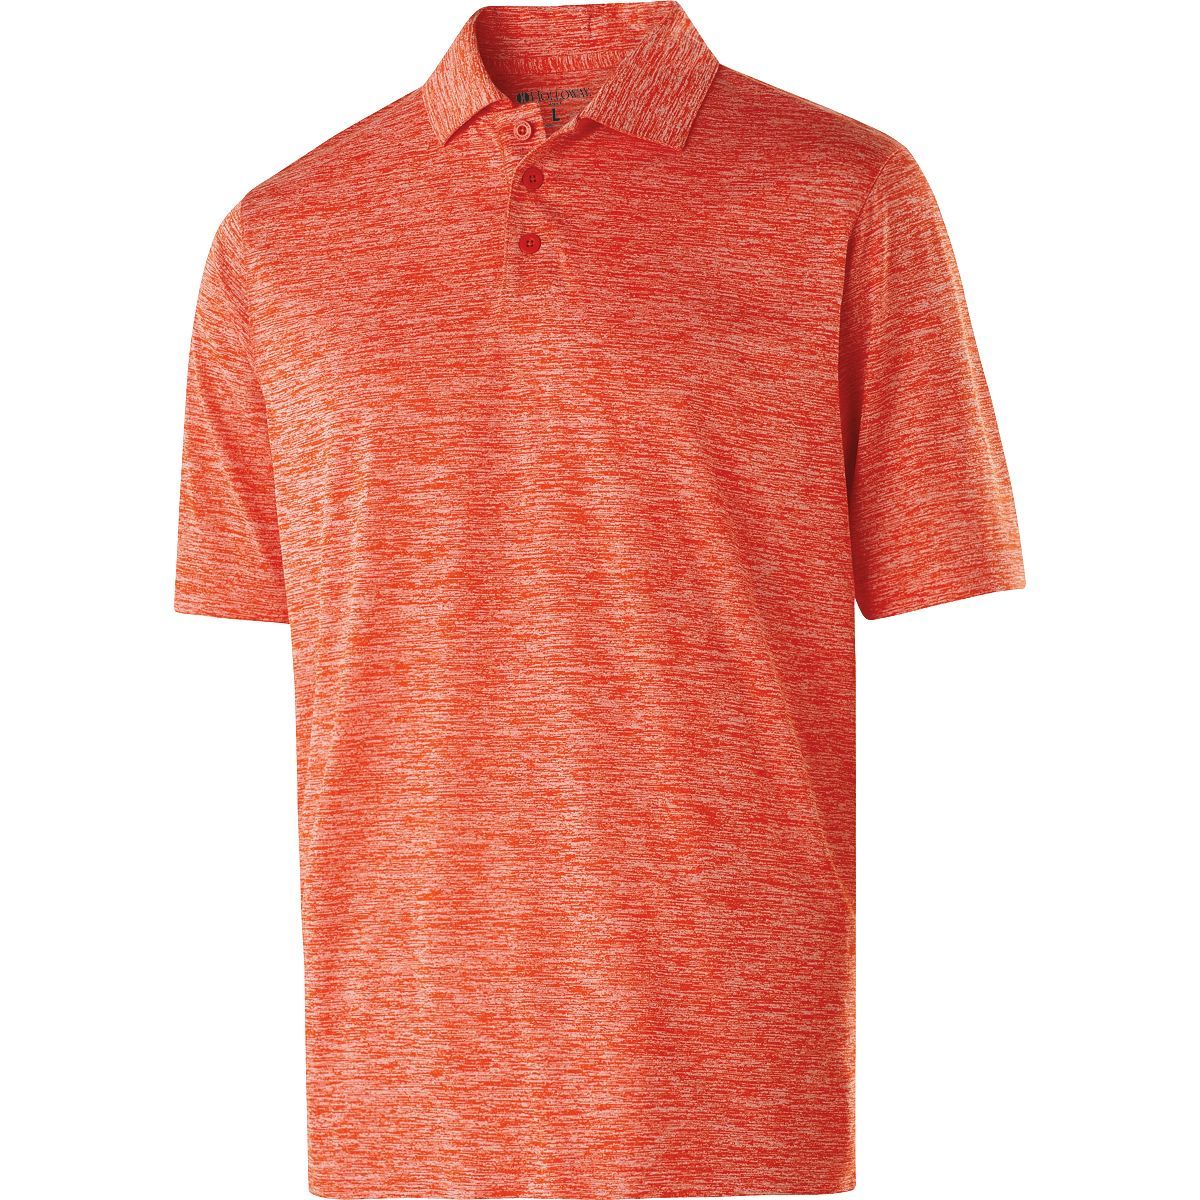 Holloway Electrify 2.0 Polo in Orange Heather  -Part of the Adult, Adult-Polos, Polos, Holloway, Shirts product lines at KanaleyCreations.com